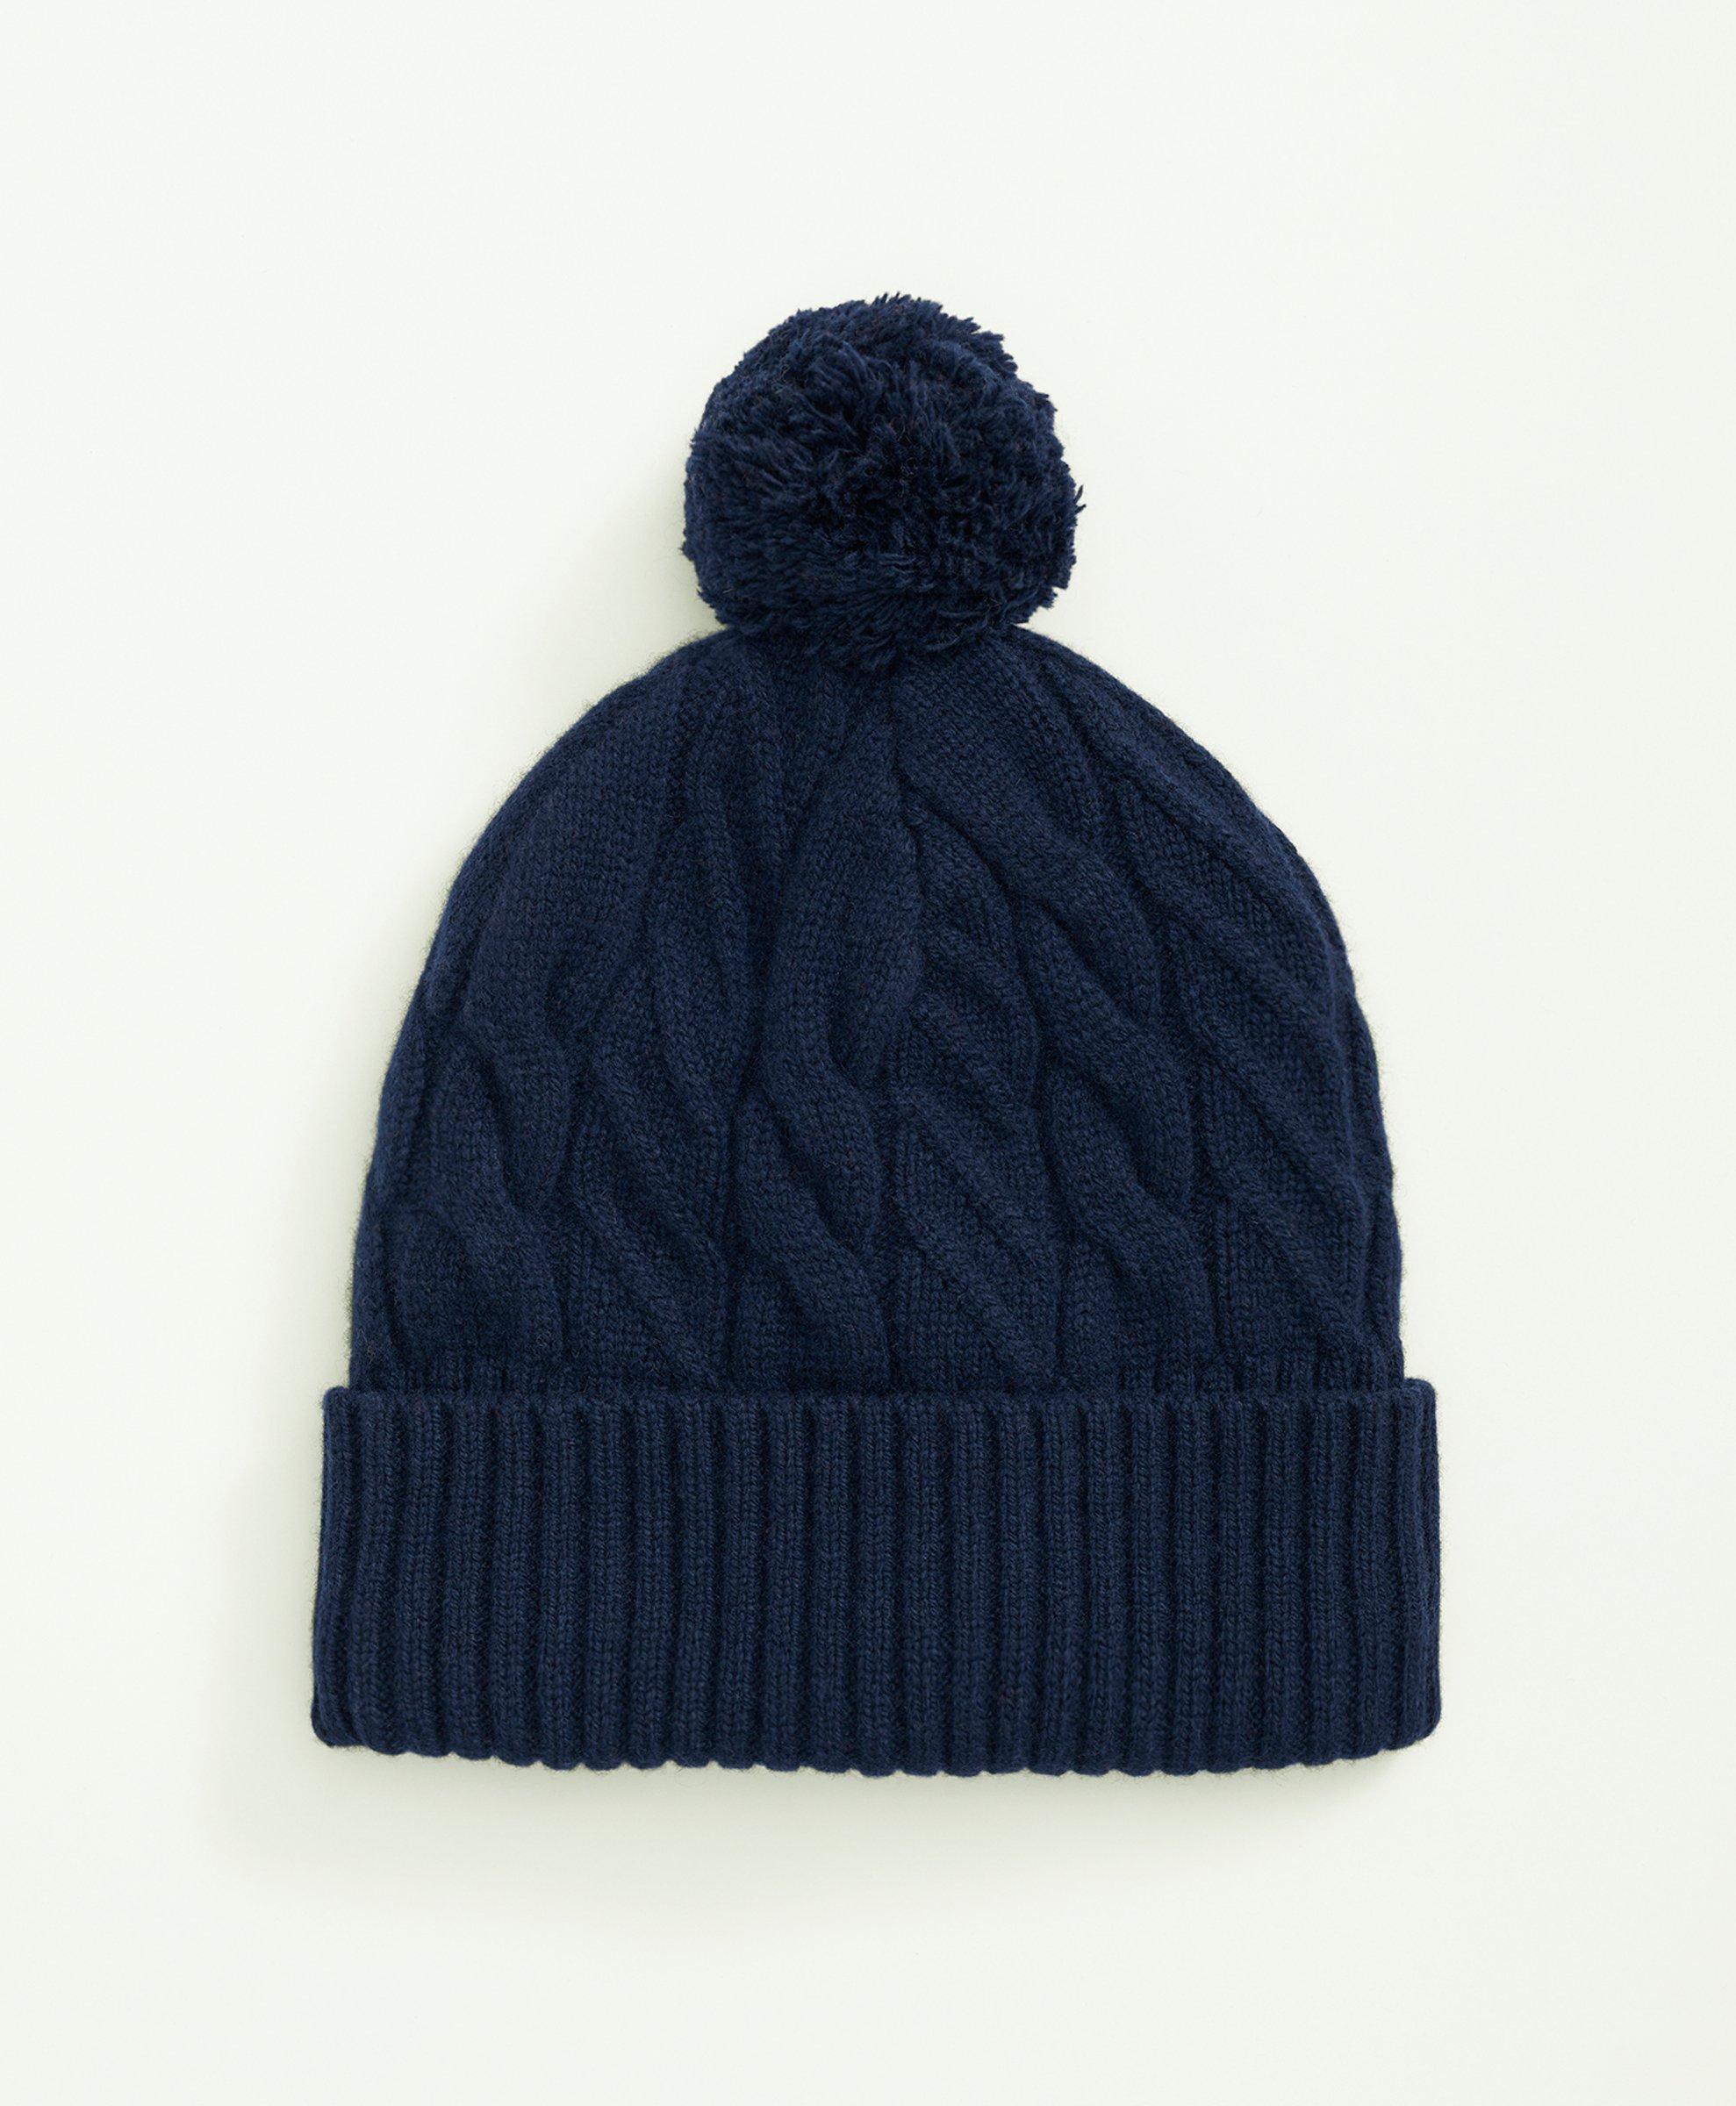 Brooks Brothers Merino Wool And Cashmere Blend Cable Knit Pom Beanie | Navy